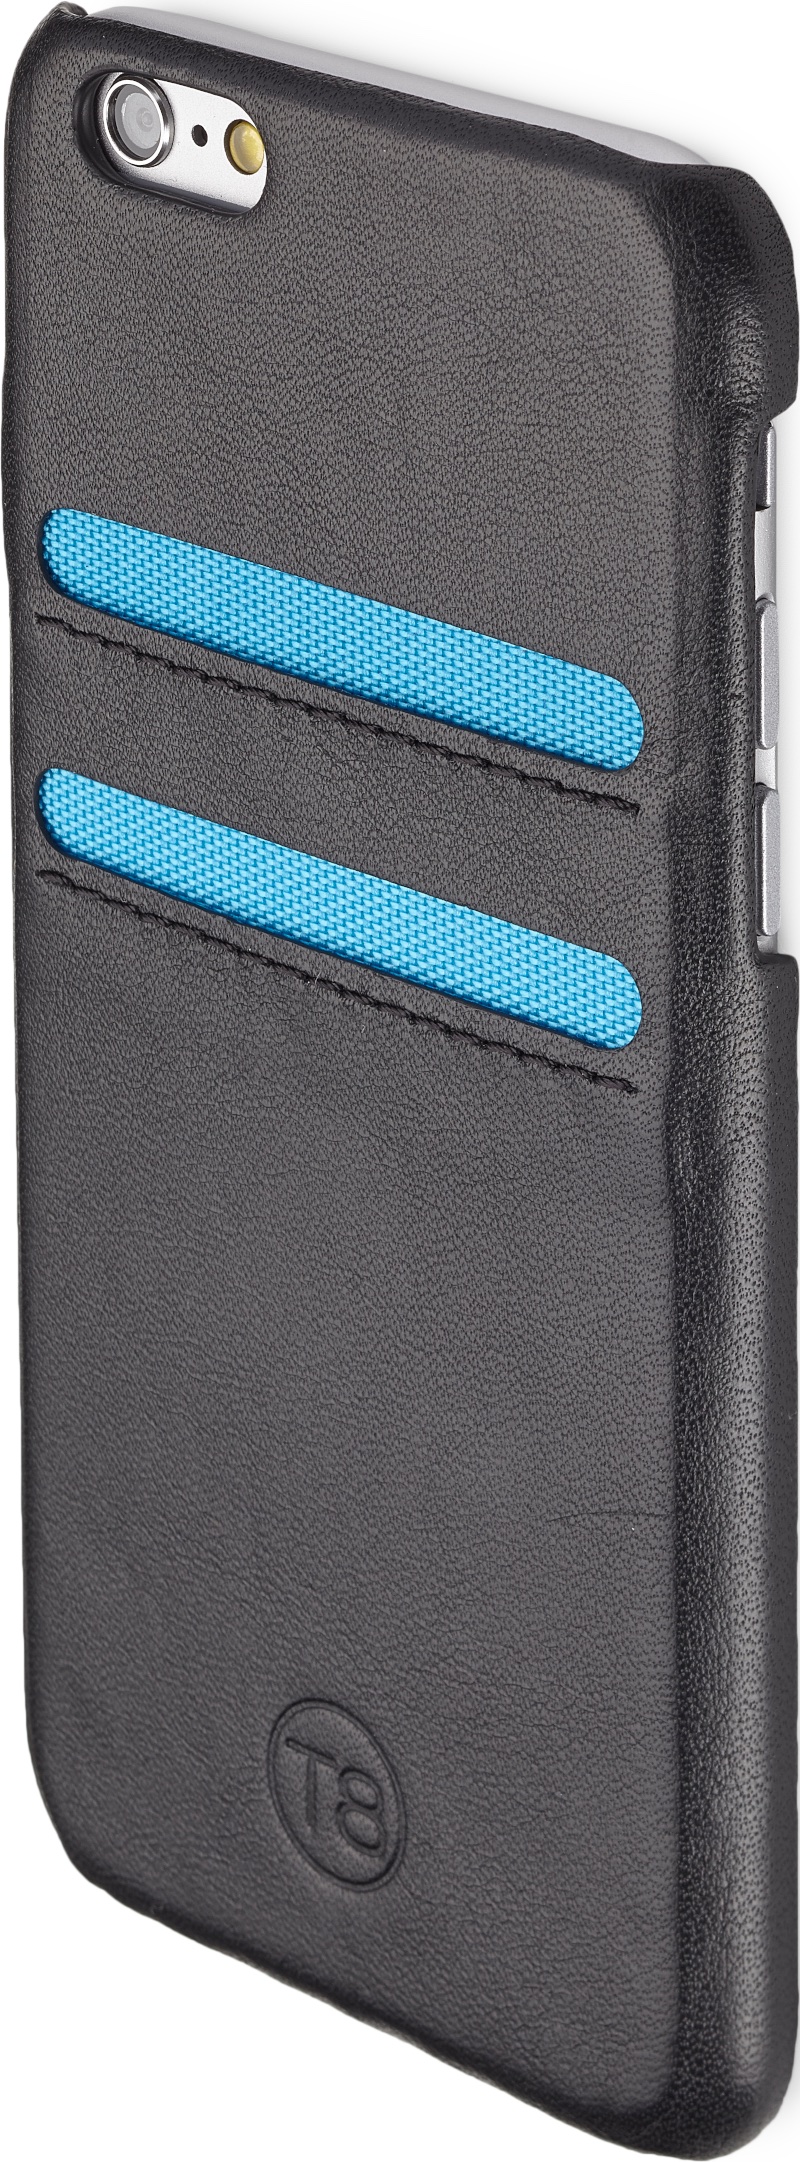 T8 Salt iPhone 6 wallet case in black leather and blue trim